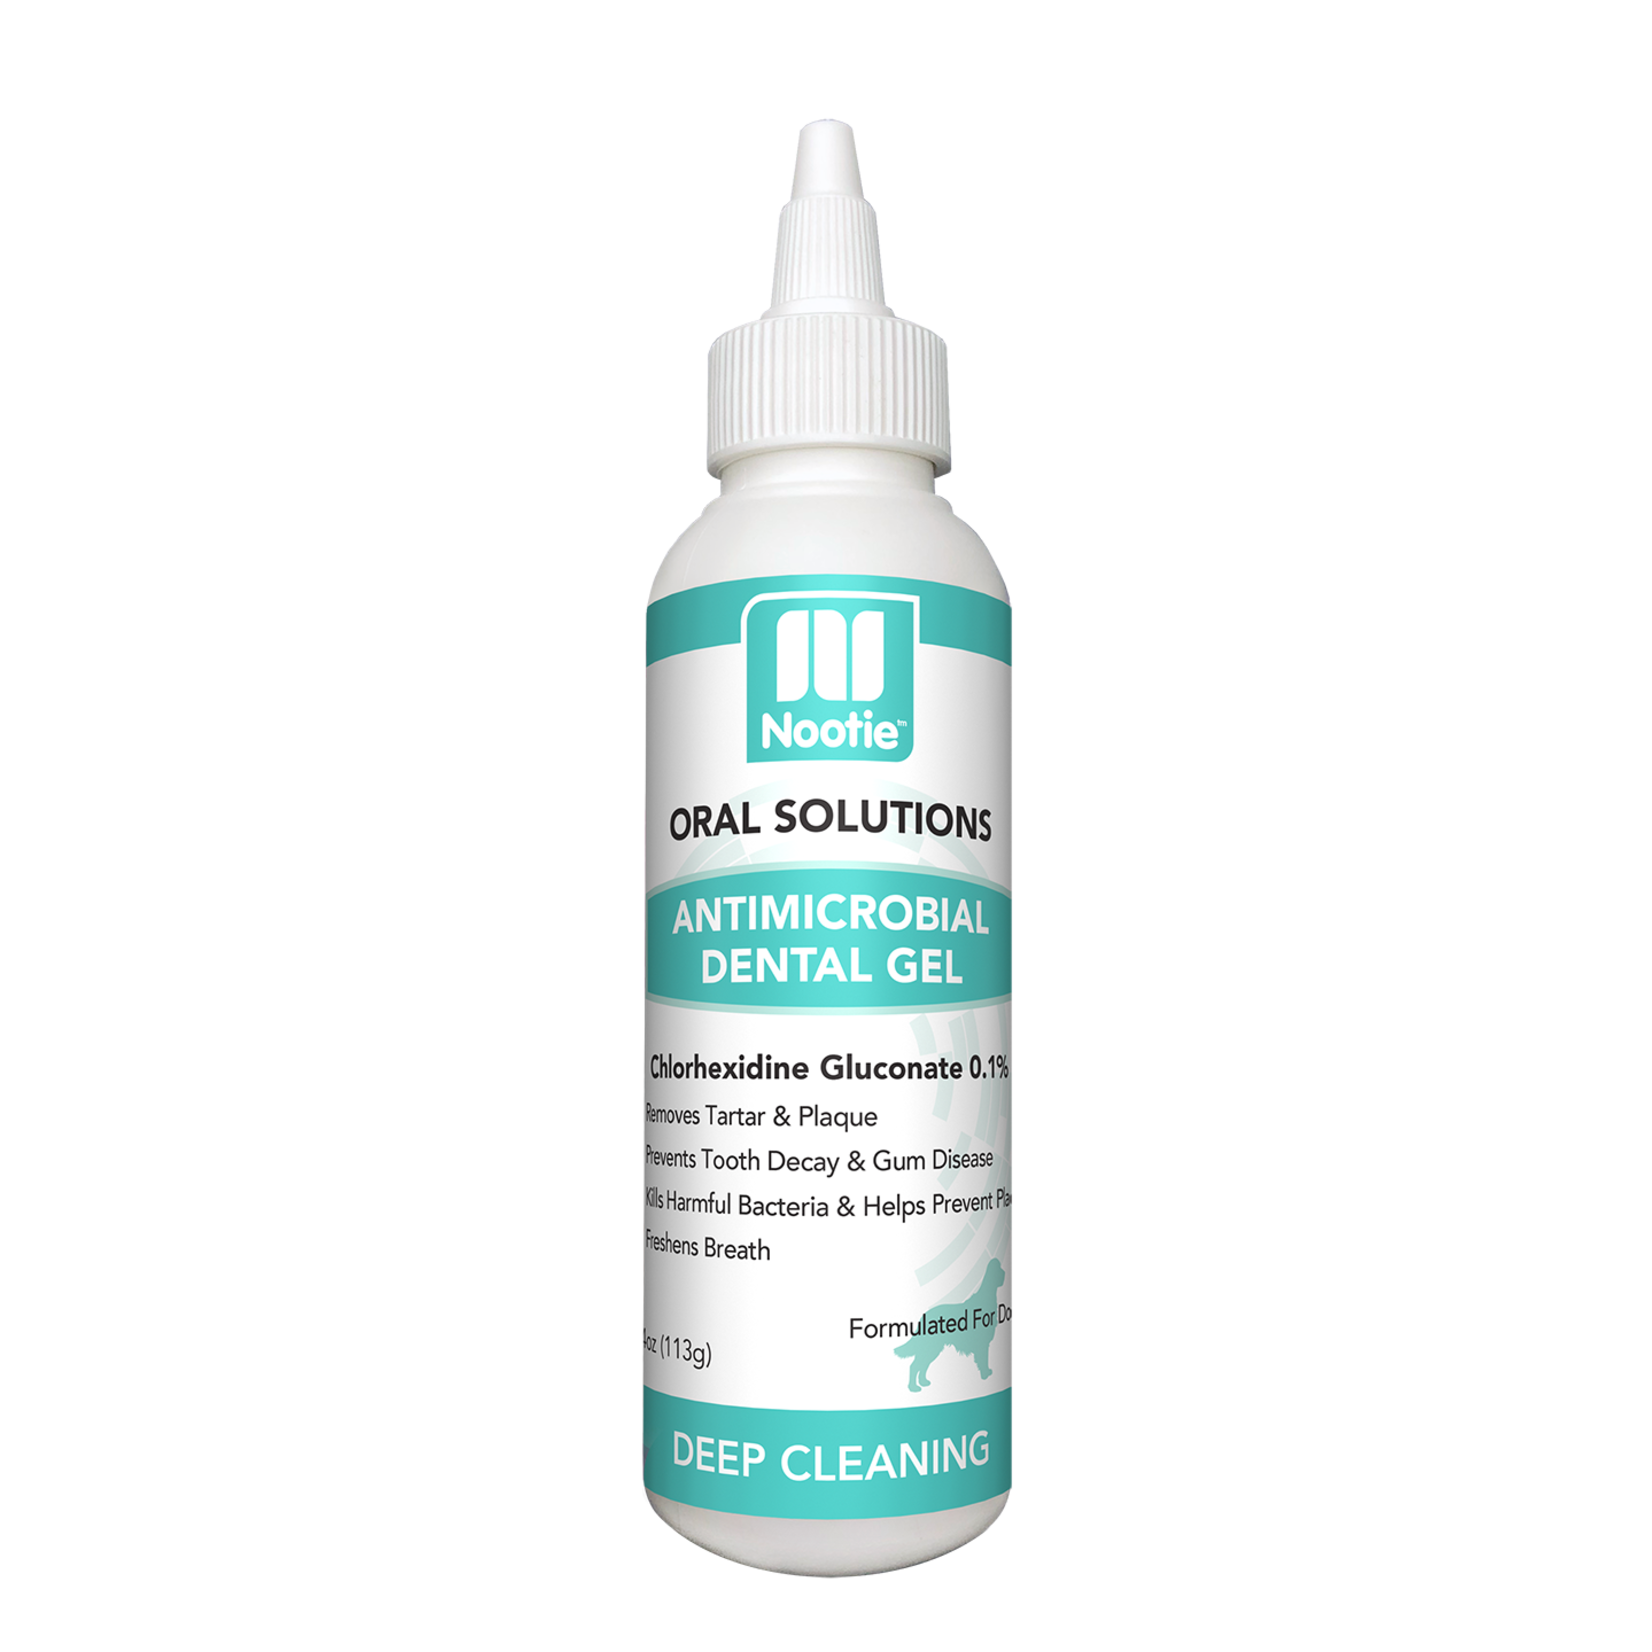 Nootie Nootie Oral Solutions - Deep Cleaning Antimicrobial Dental Gel for Dogs